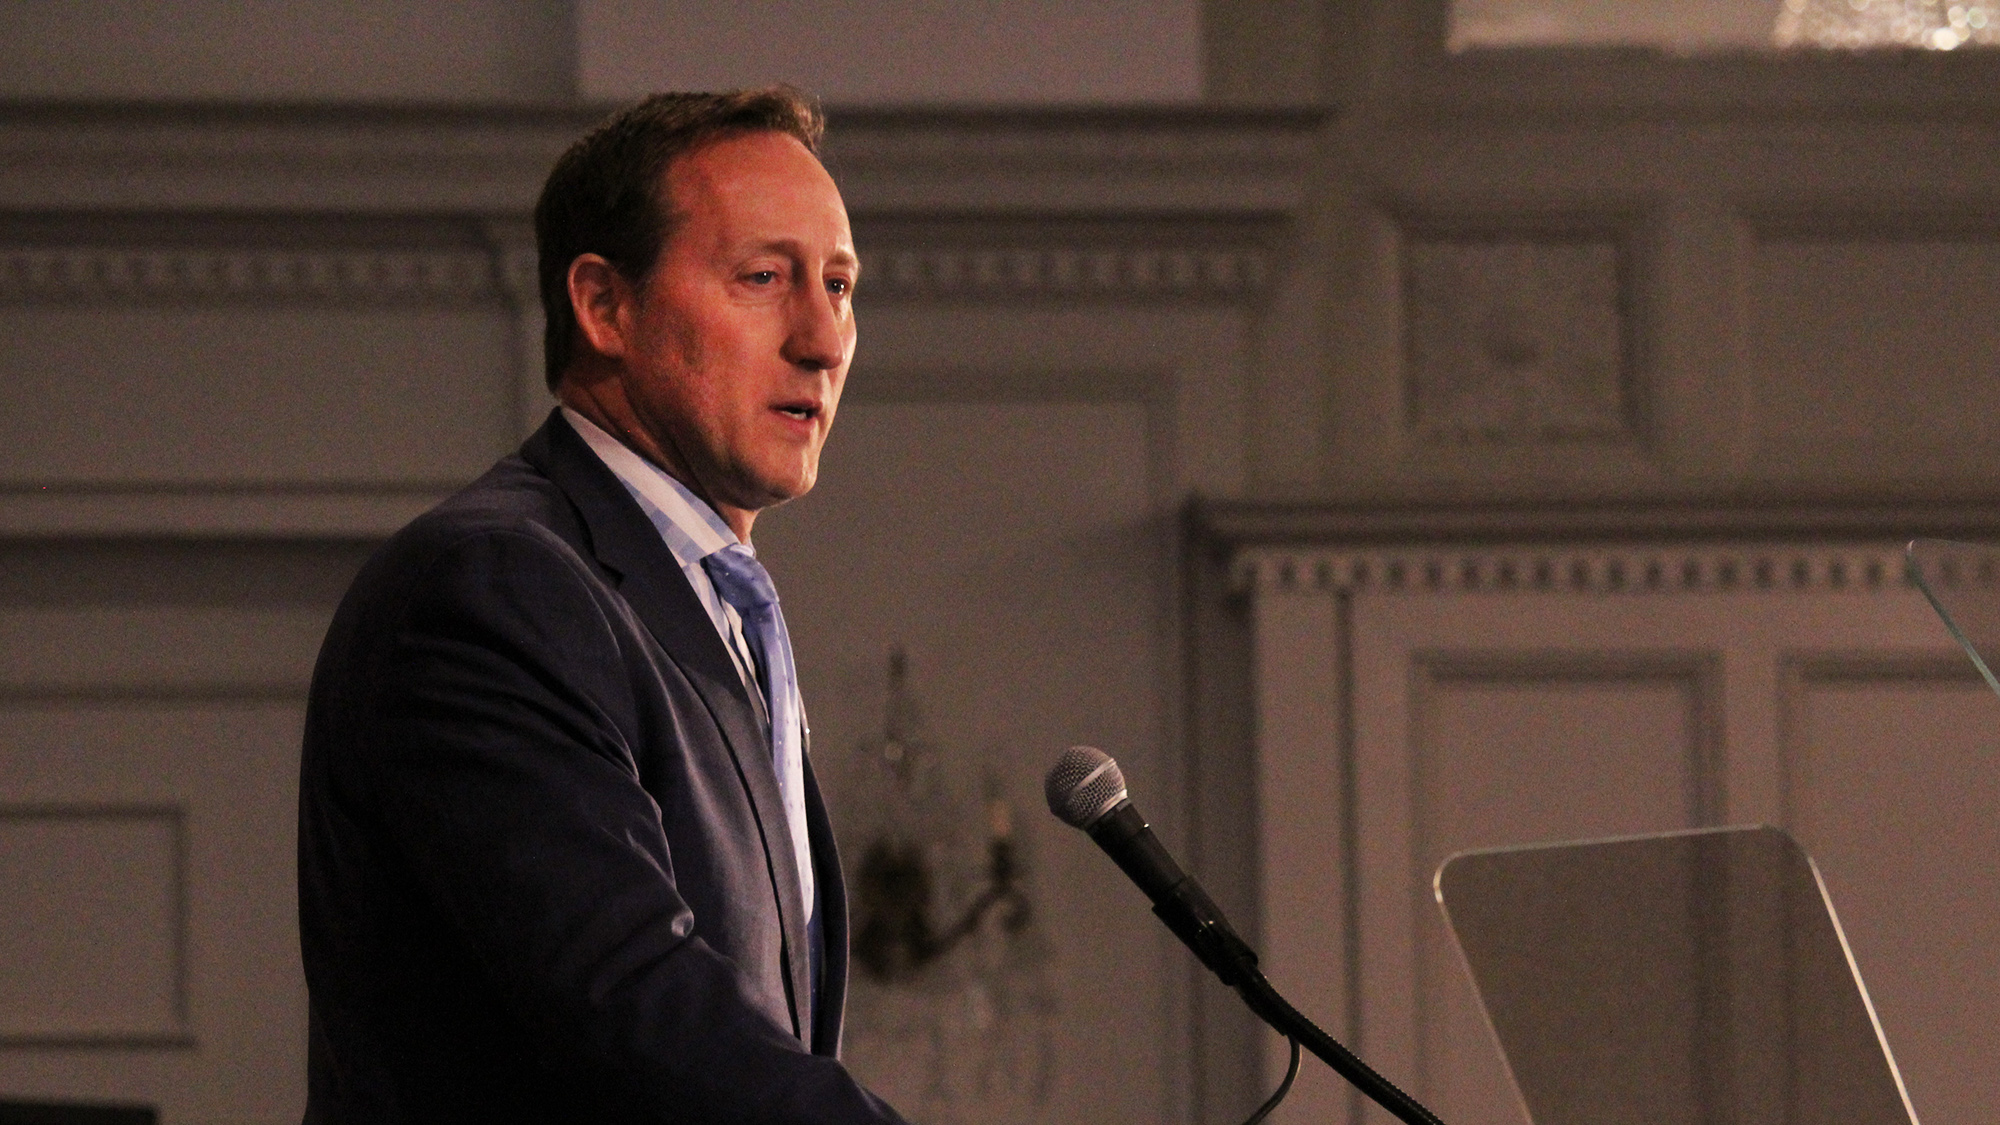 Peter MacKay addresses the crowd during Saturday's Conservative federal leadership forum.